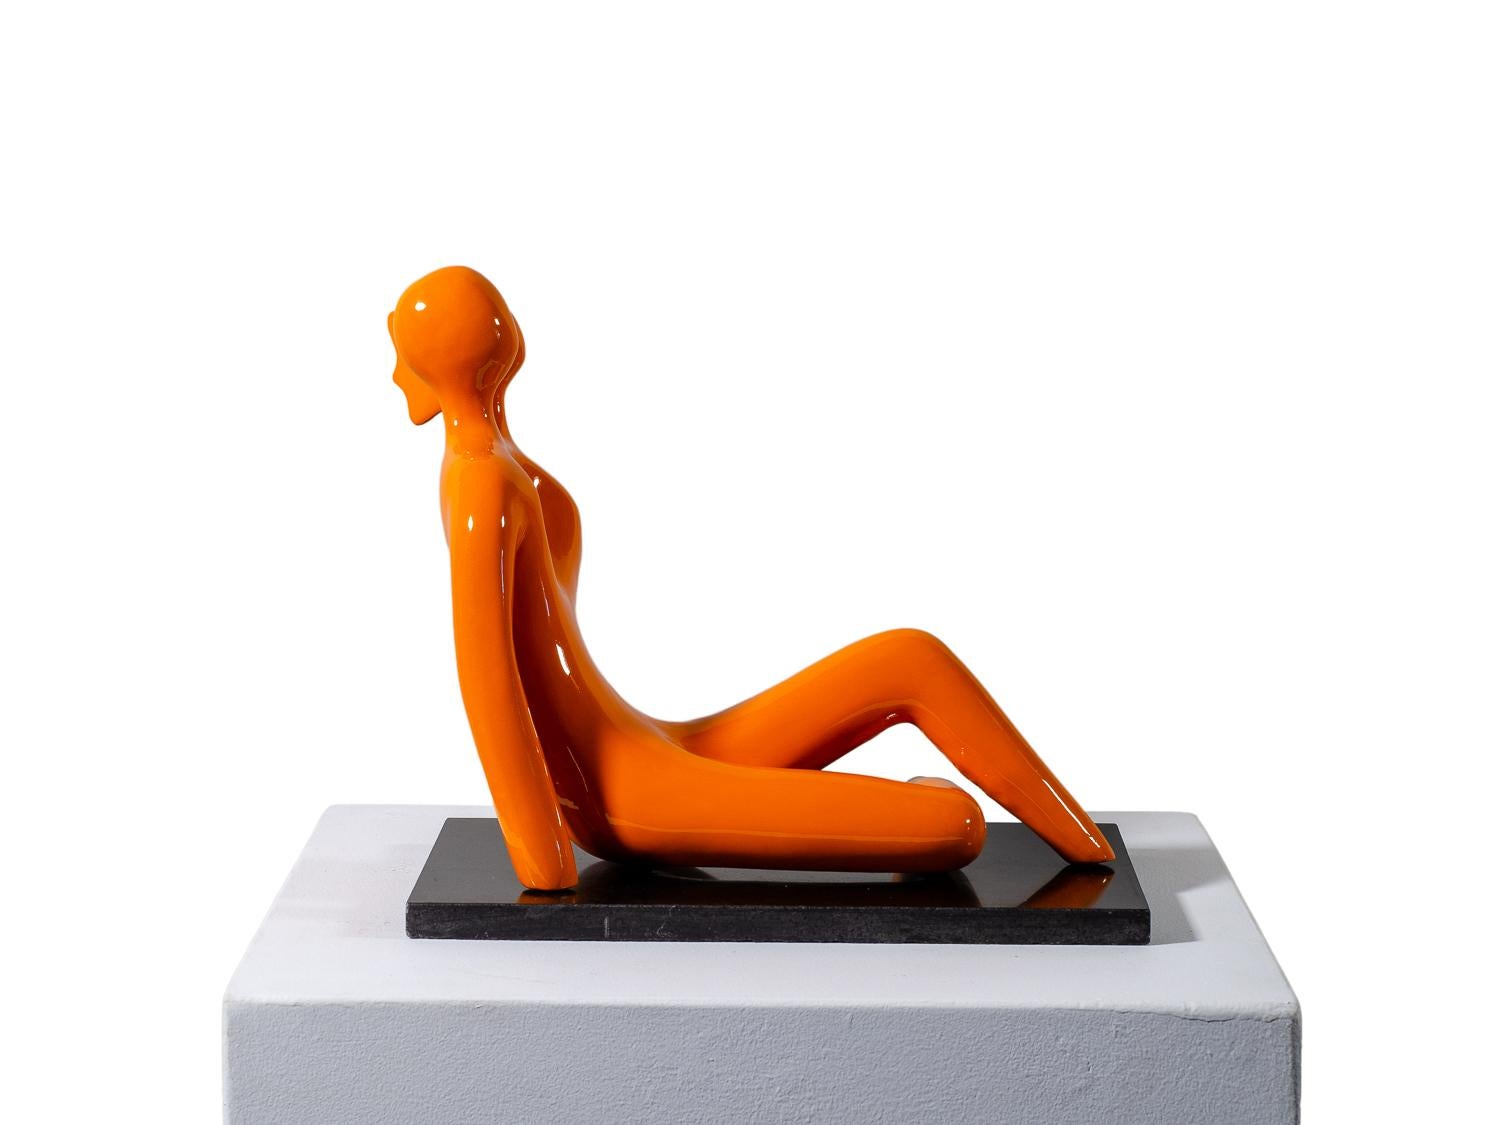 Soul Mates #2 (in orange) When in love their souls and bodies fuse into one. - Sculpture by Beatriz Gerenstein